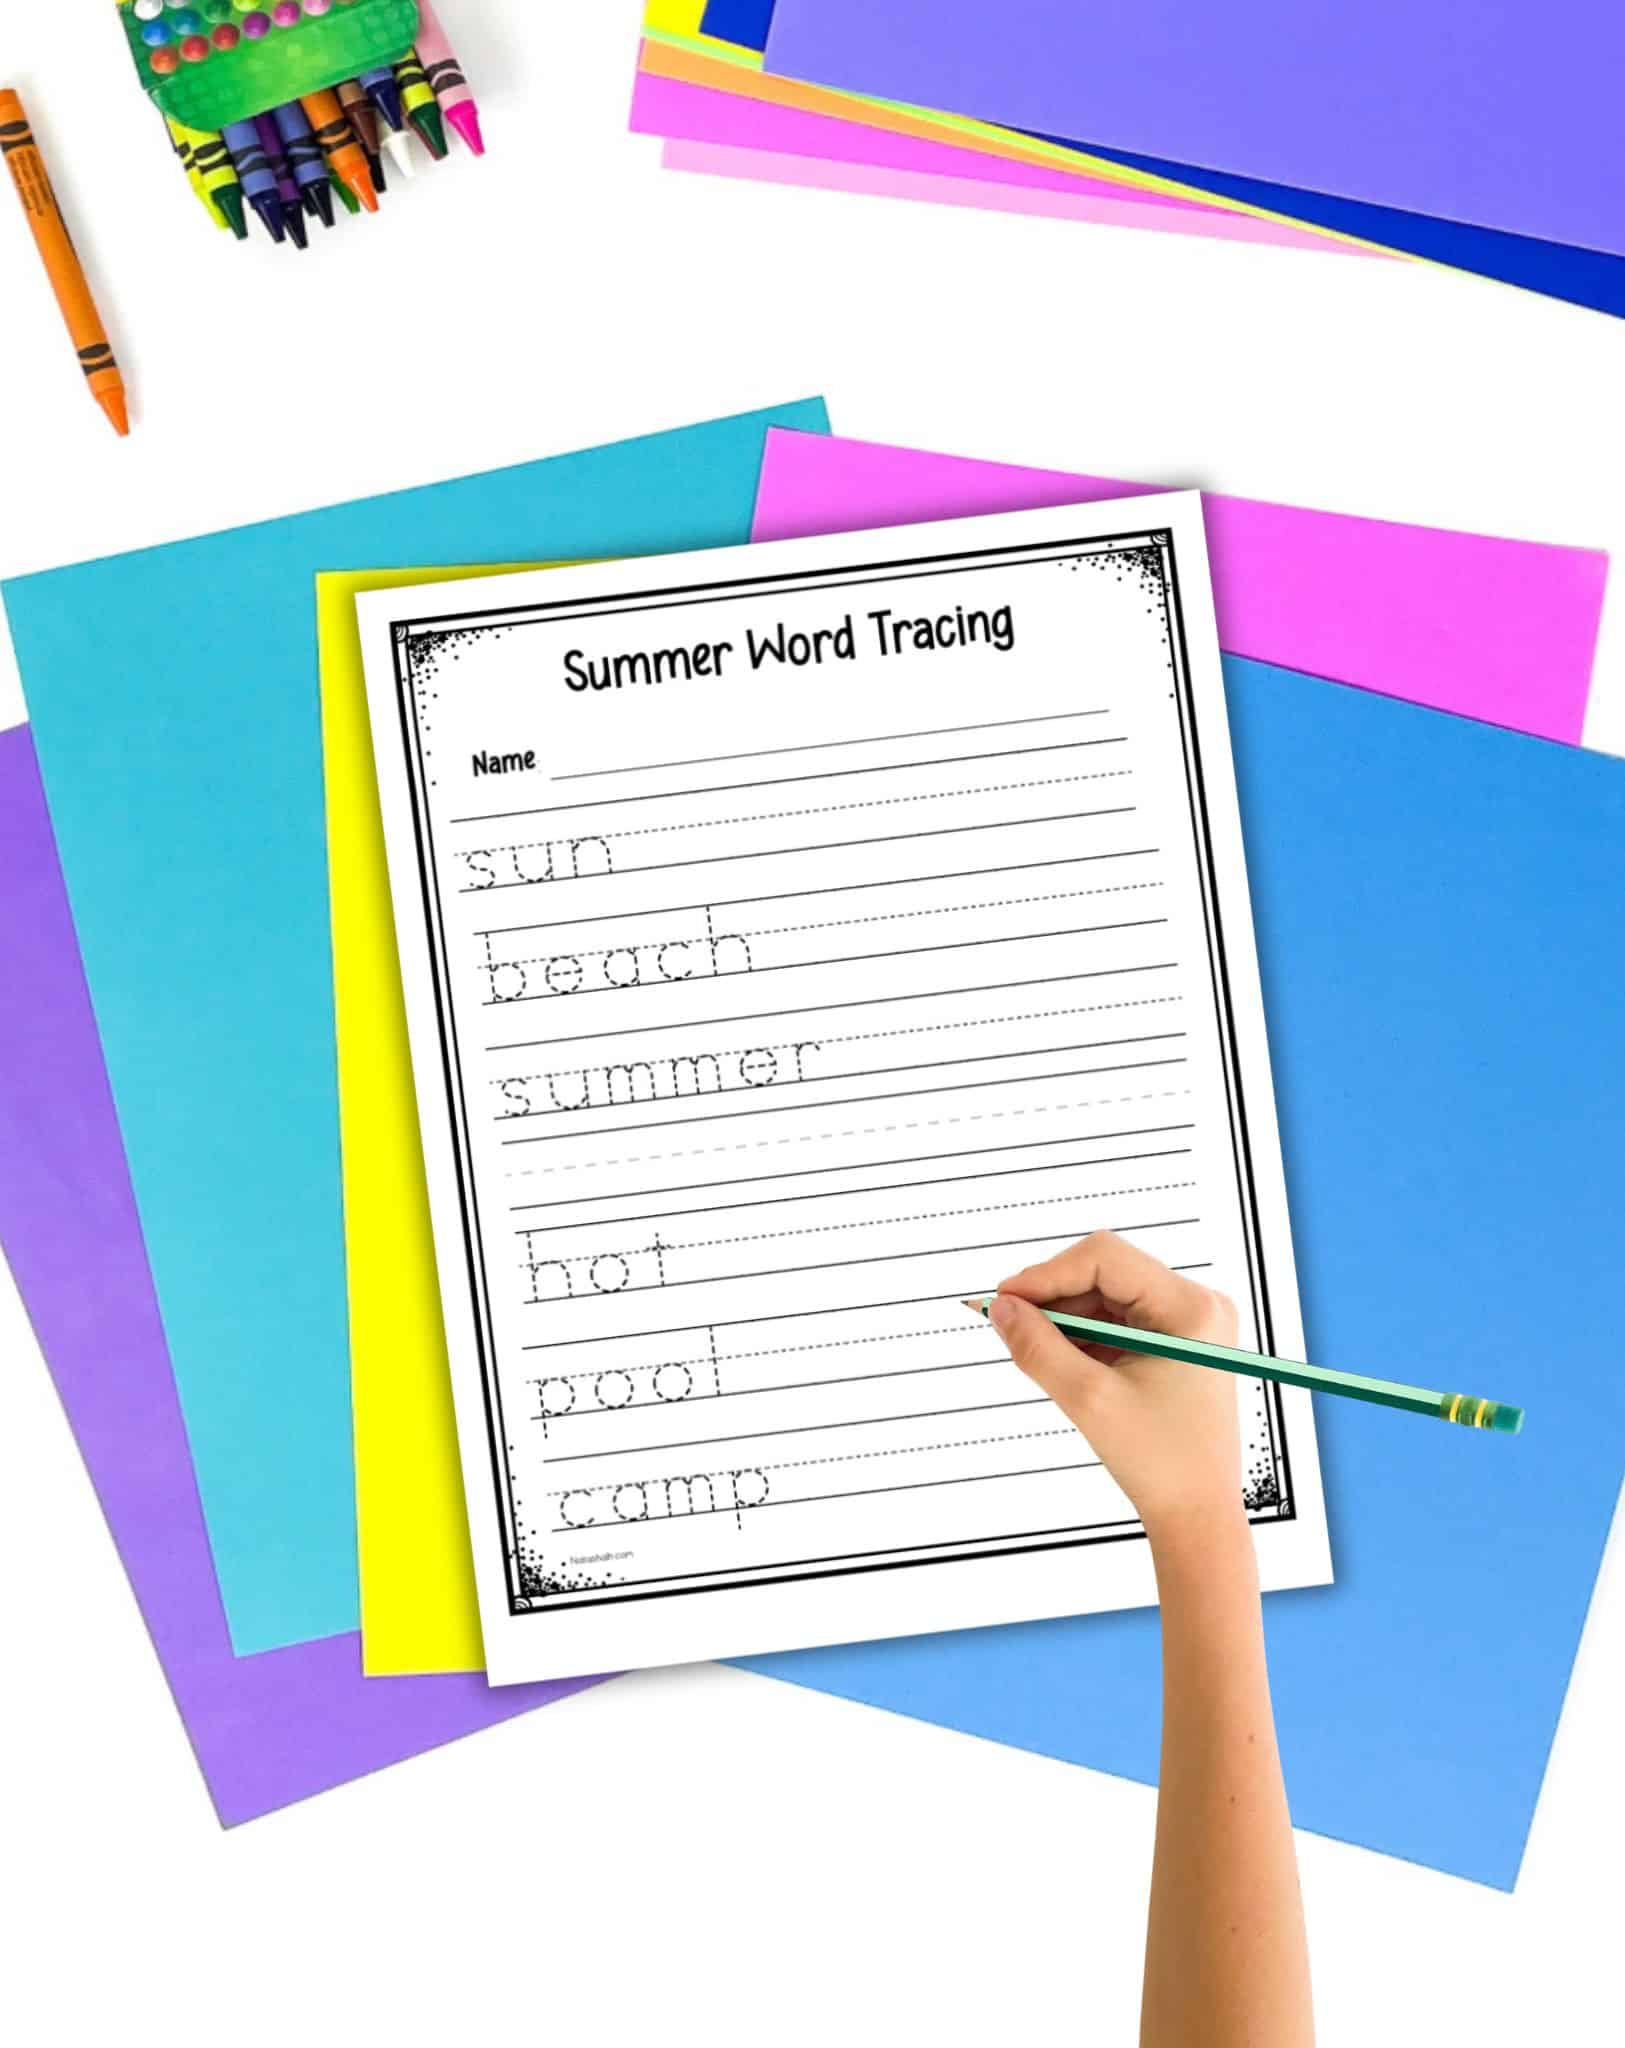 Colorful student desk supplies and a hand with a green pencil hovering over a summer word tracing worksheet 